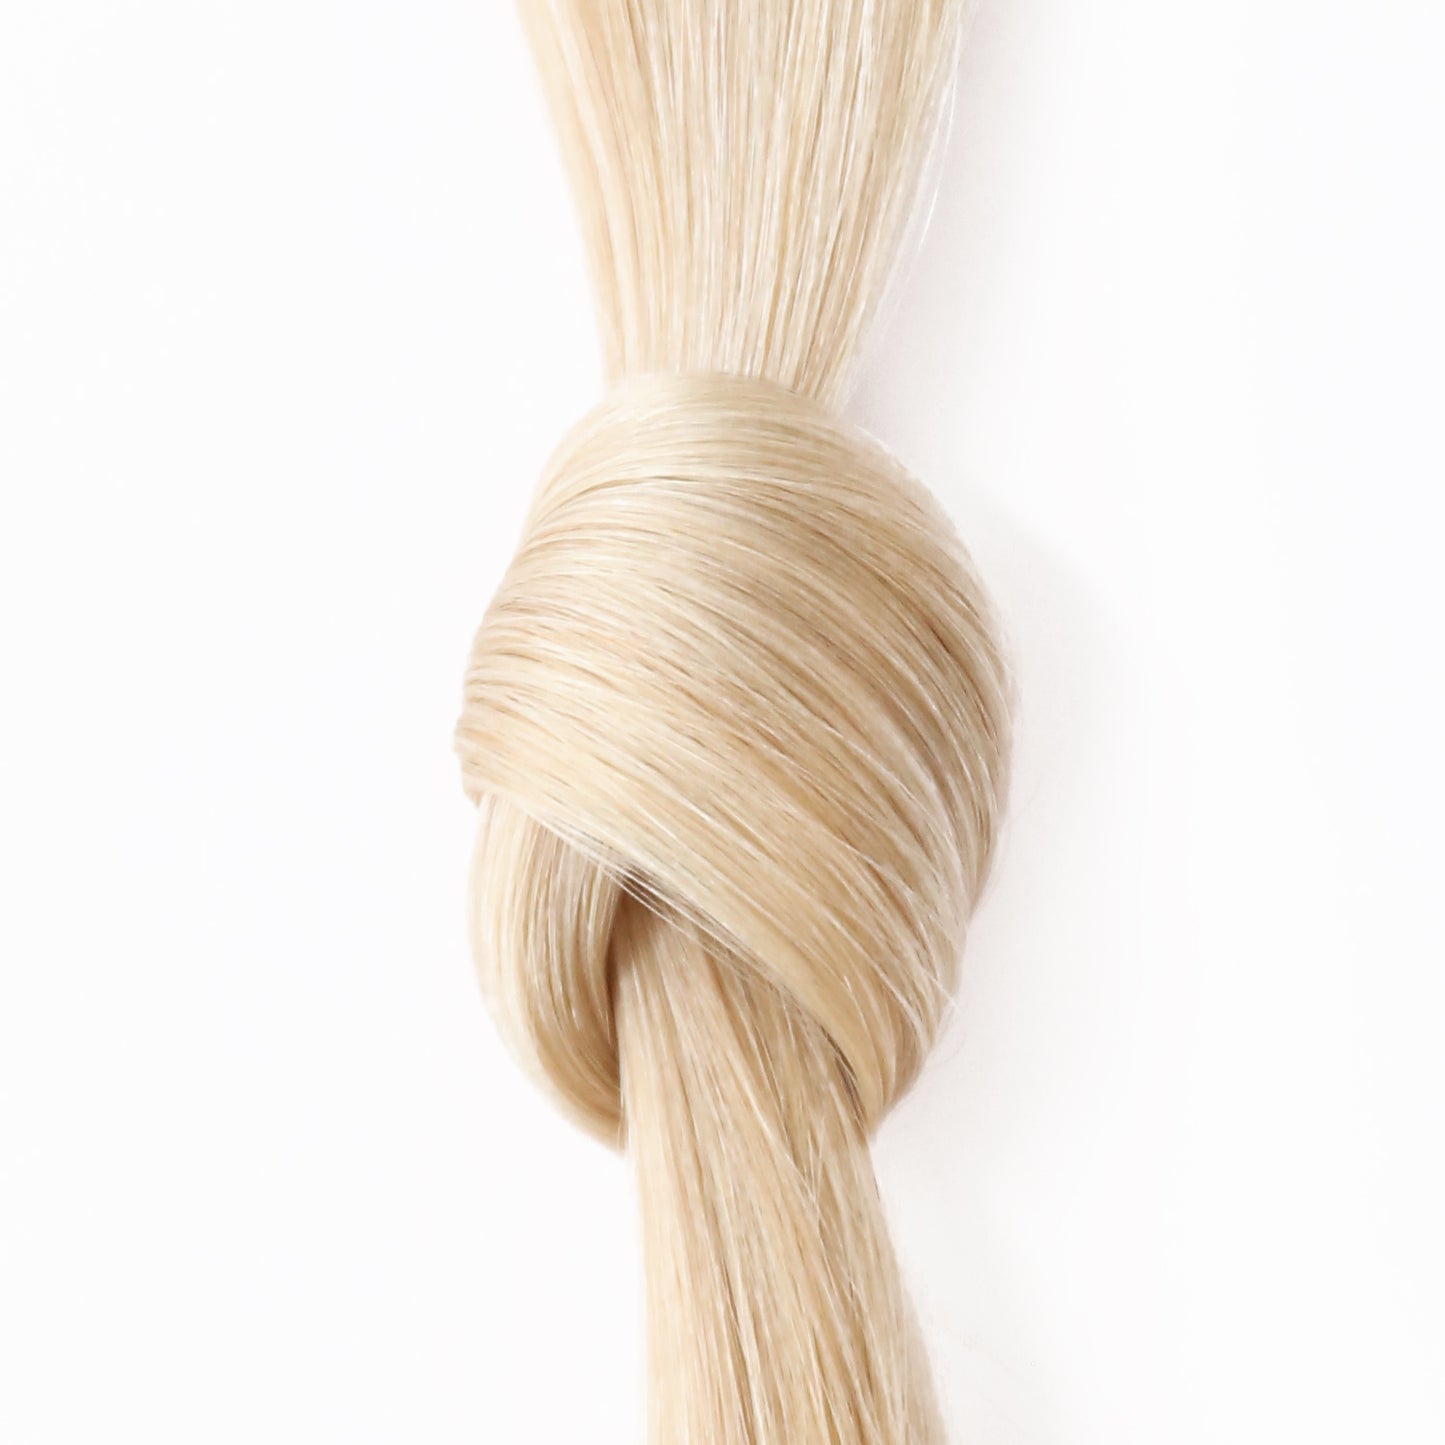 59 - Prime Tape In Icy Platinum Blonde - True chromatic and universally rich shades of natural color.